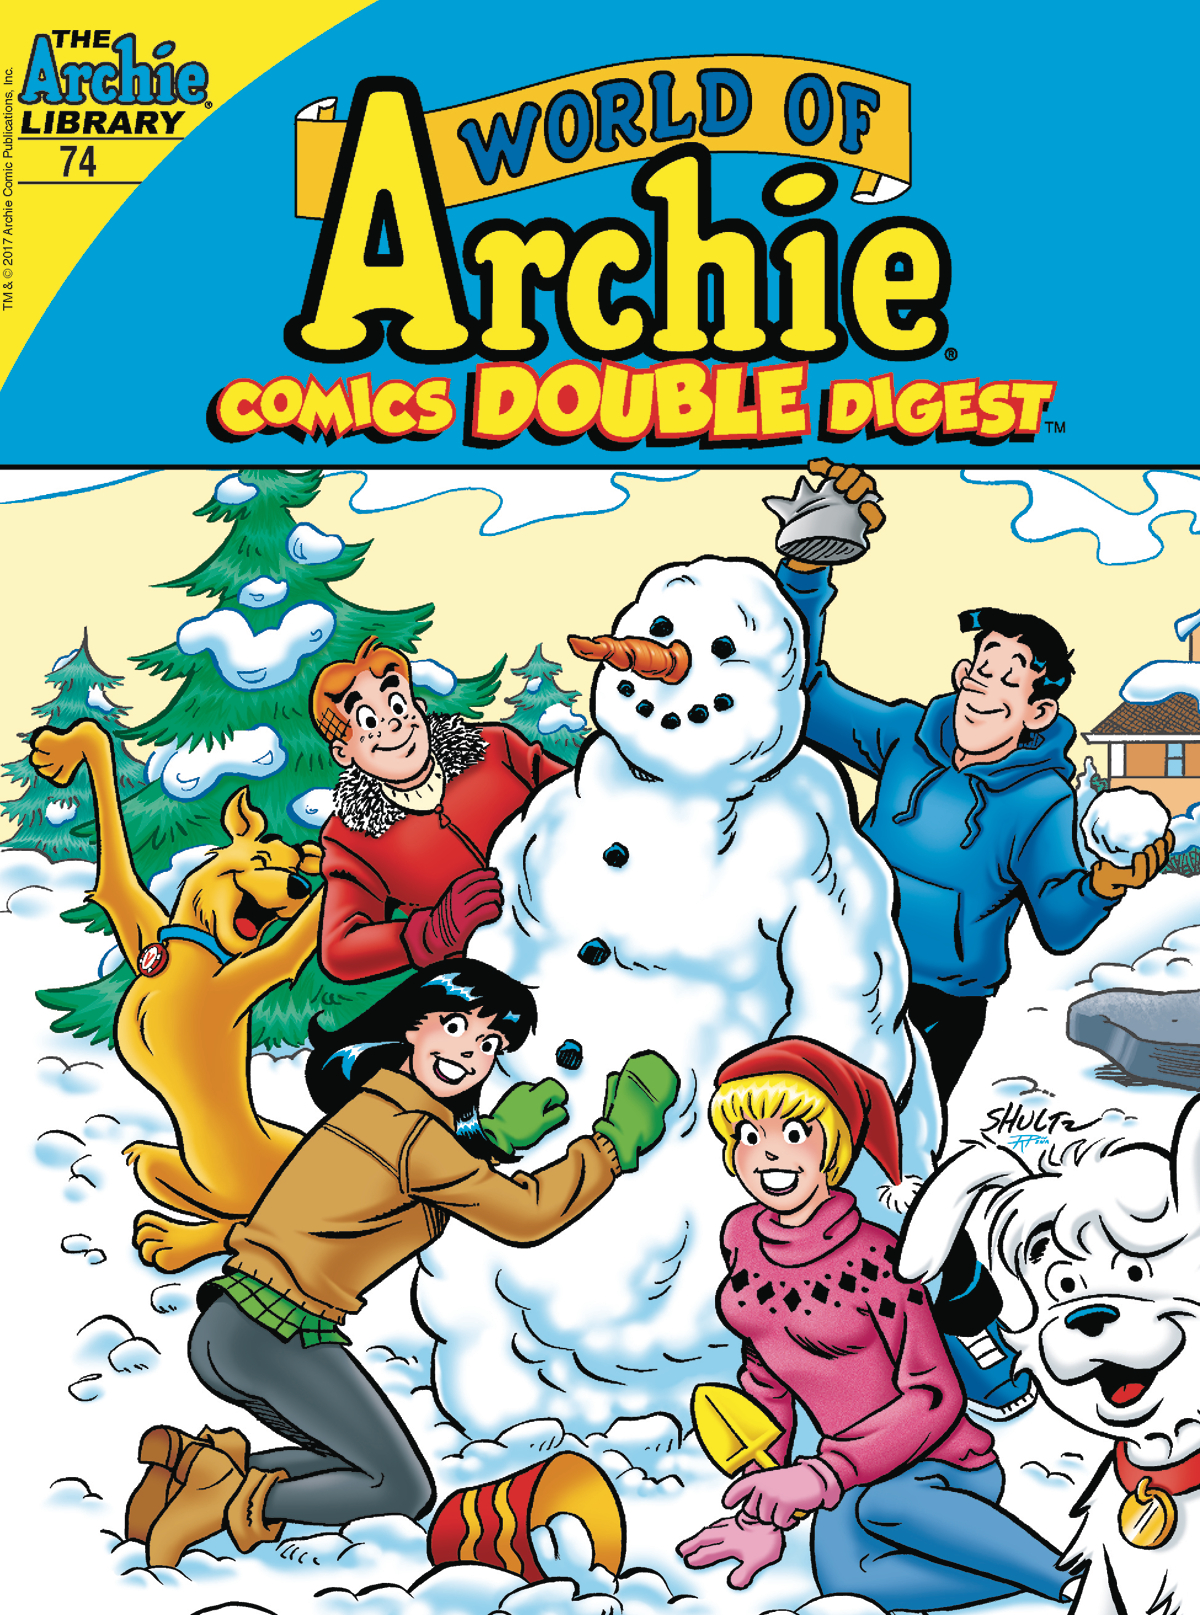 World of archie comics double digest #74 (OCT171187) .